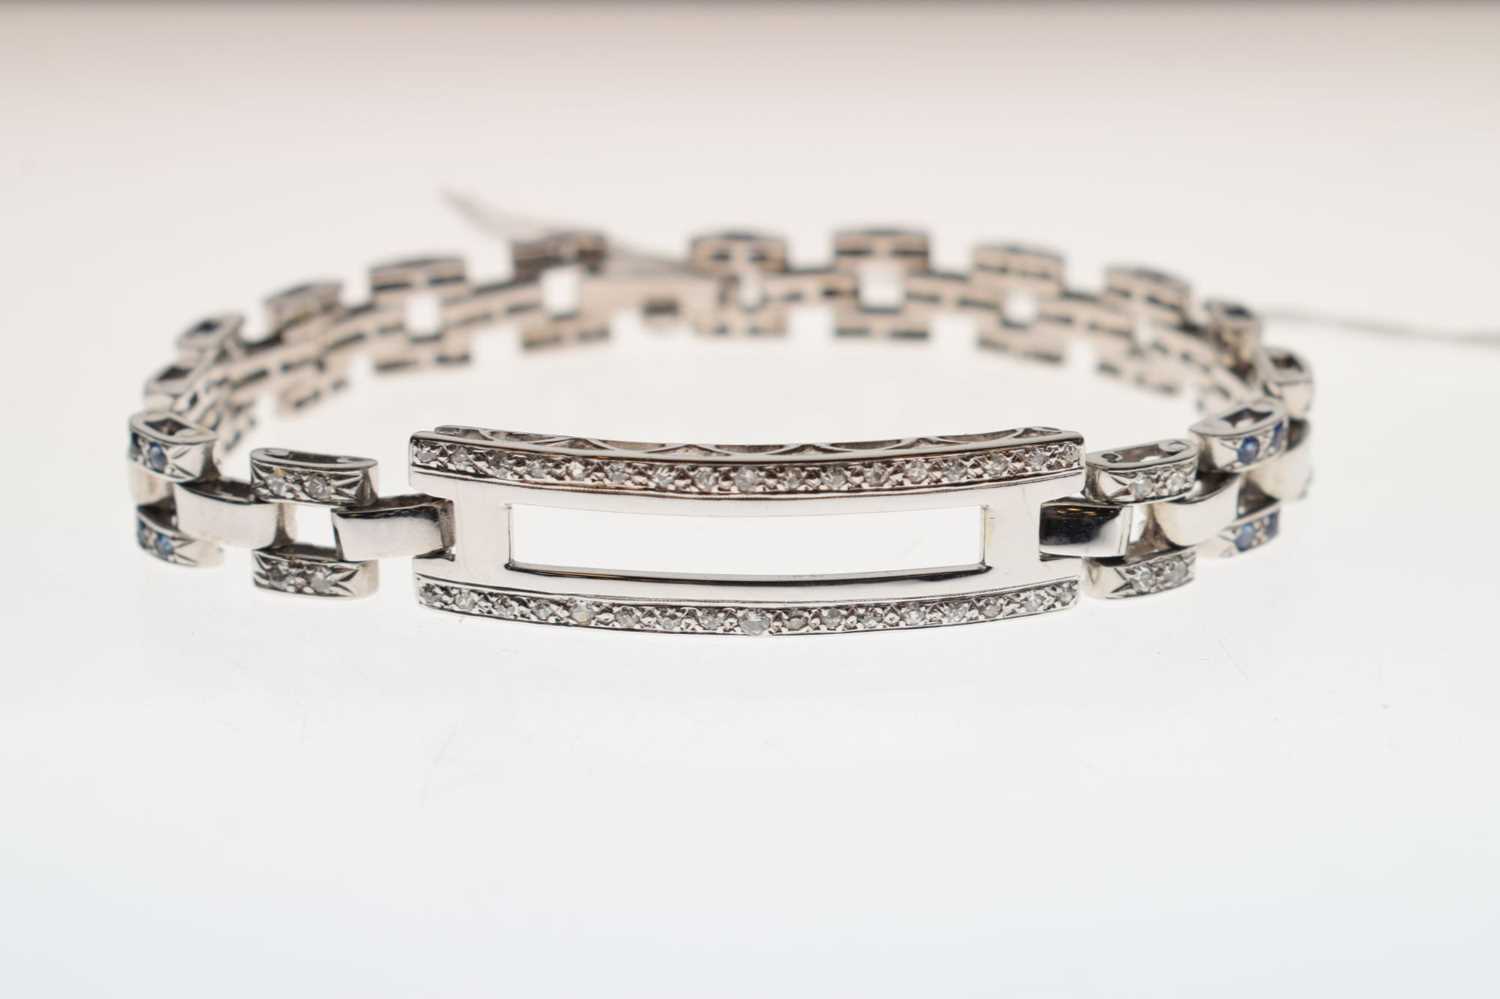 French sapphire and diamond 18ct white gold bracelet - Image 6 of 6